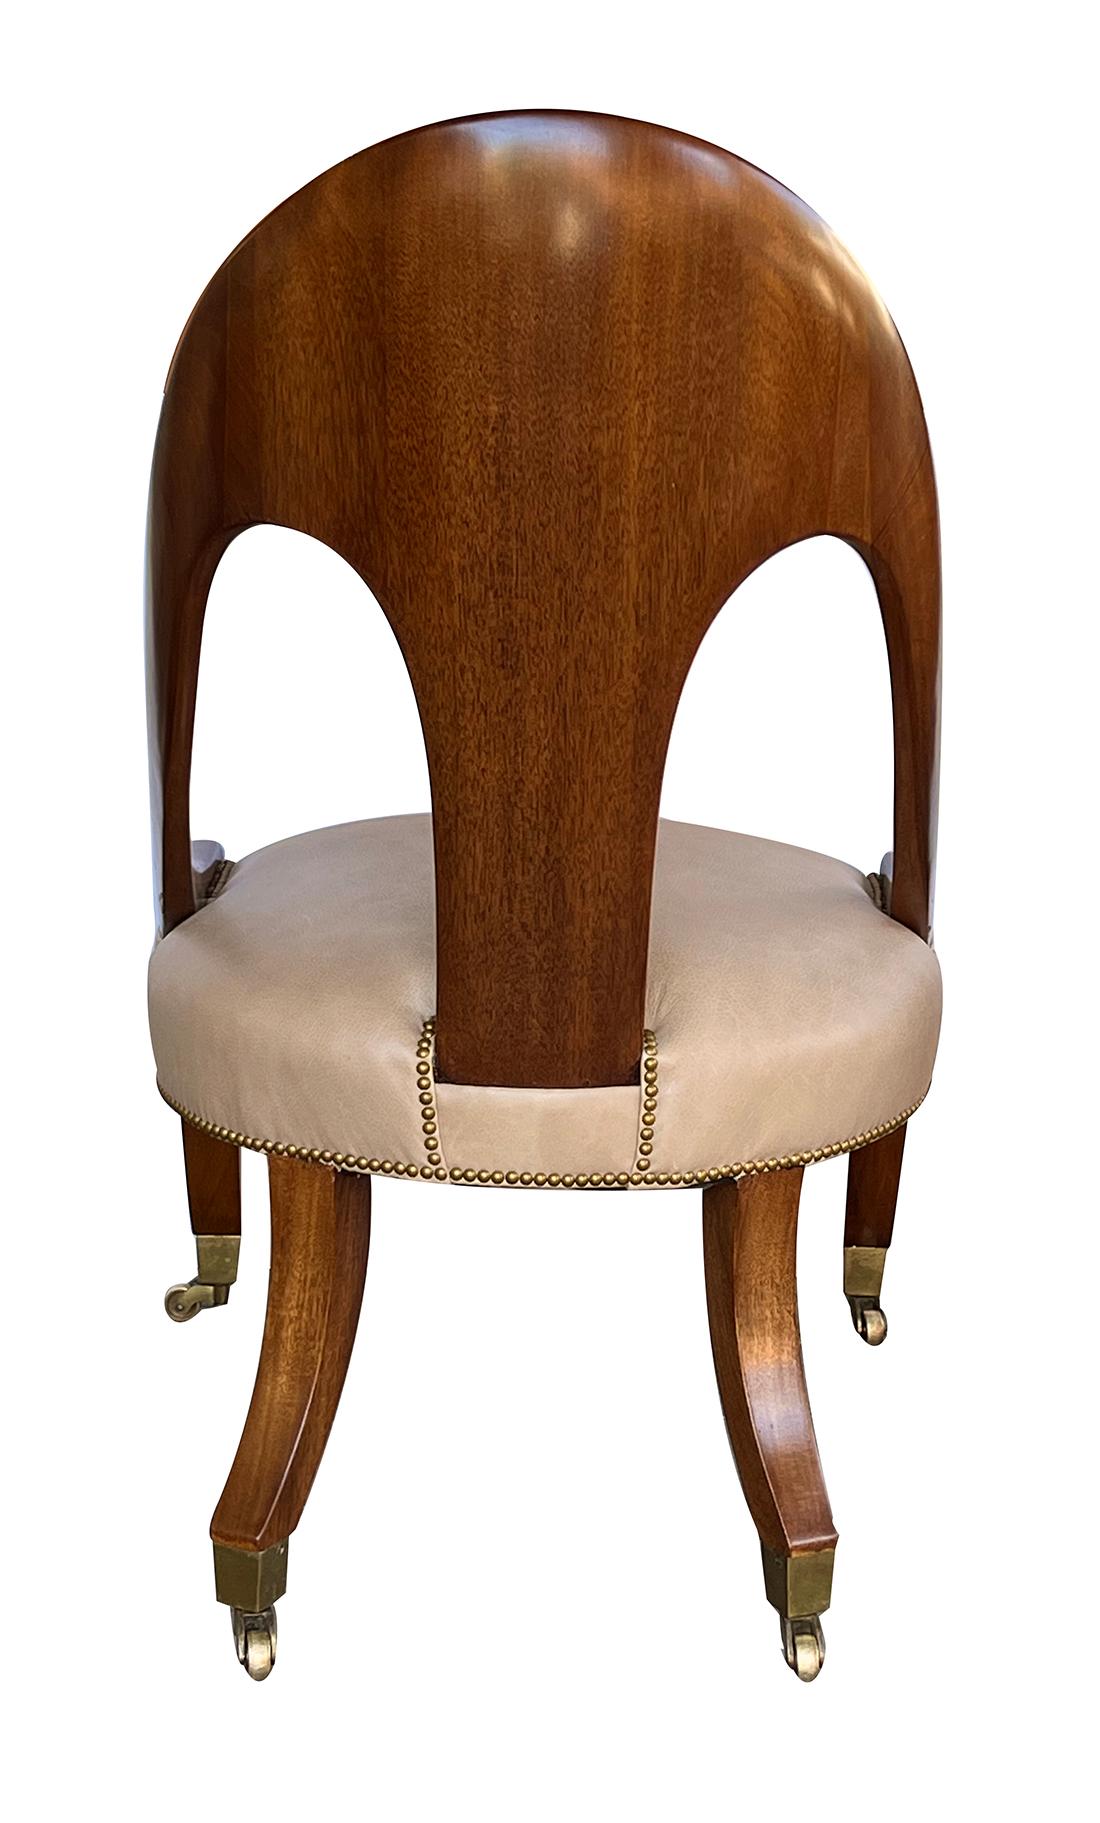 Shapely English Regency Style Solid Mahogany Spoonback Chair In Good Condition For Sale In San Francisco, CA